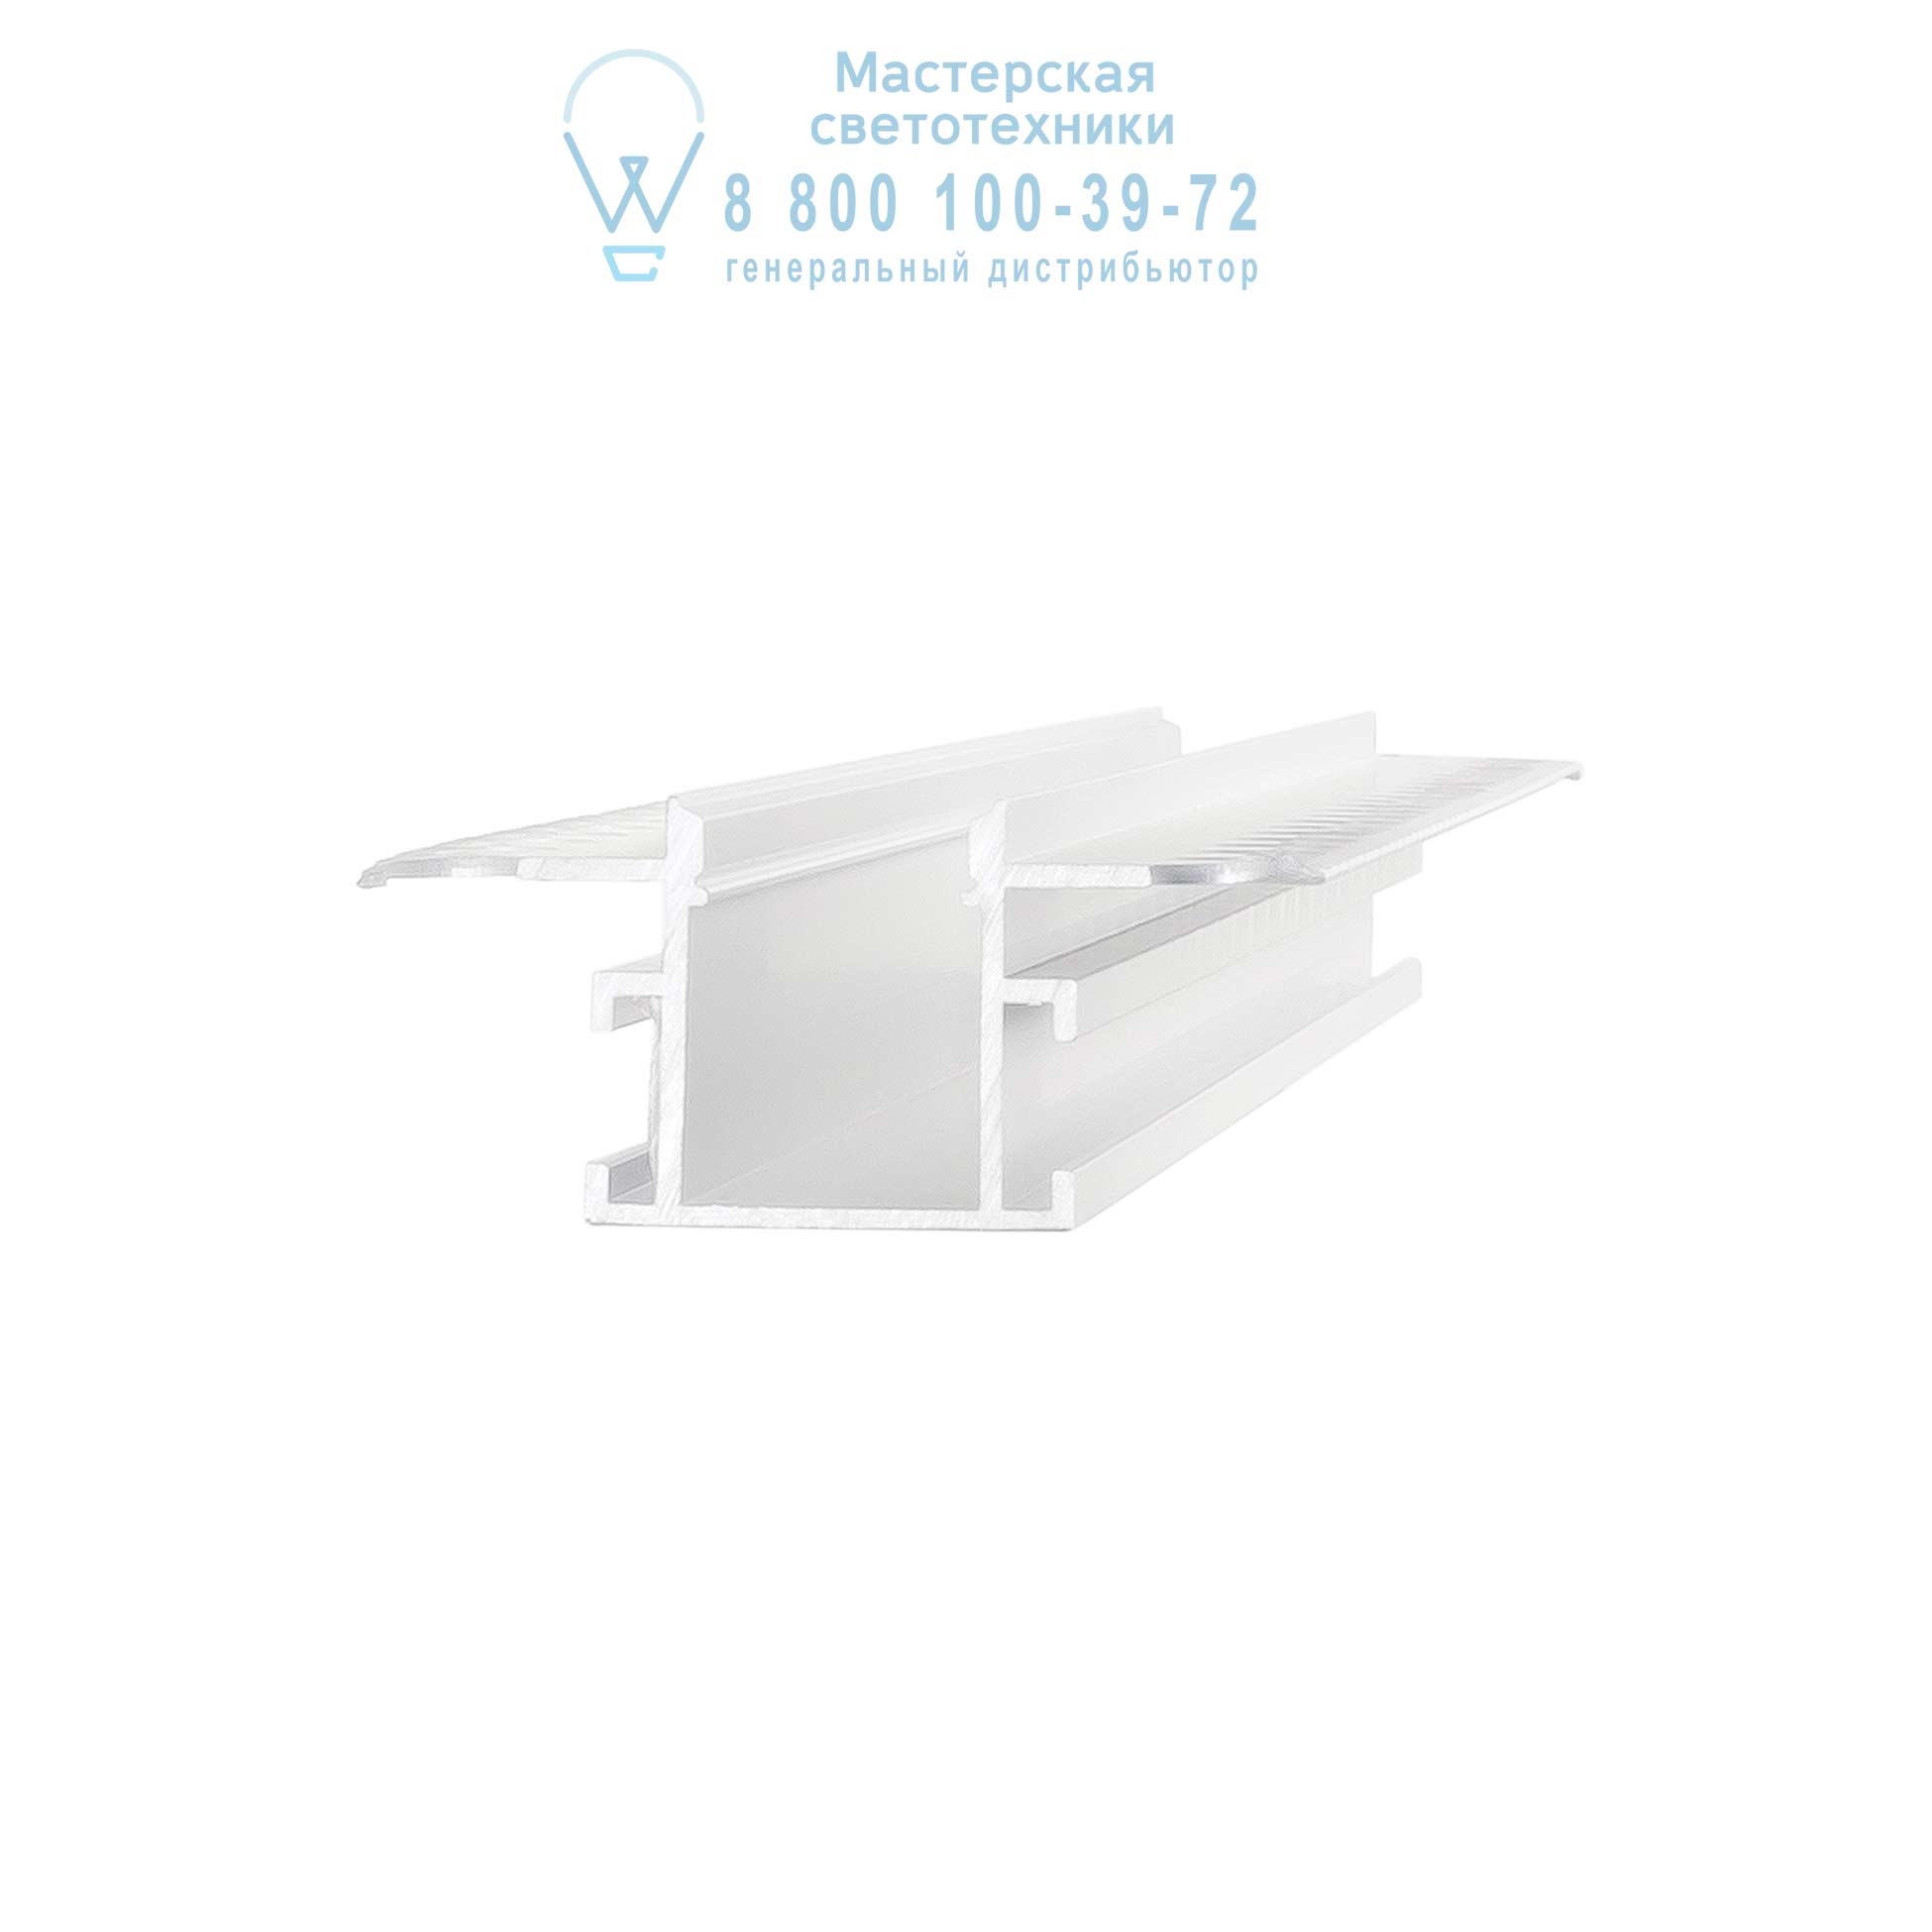 SLOT RECESSED TRIMLESS 14 x 2000 mm WHITE   